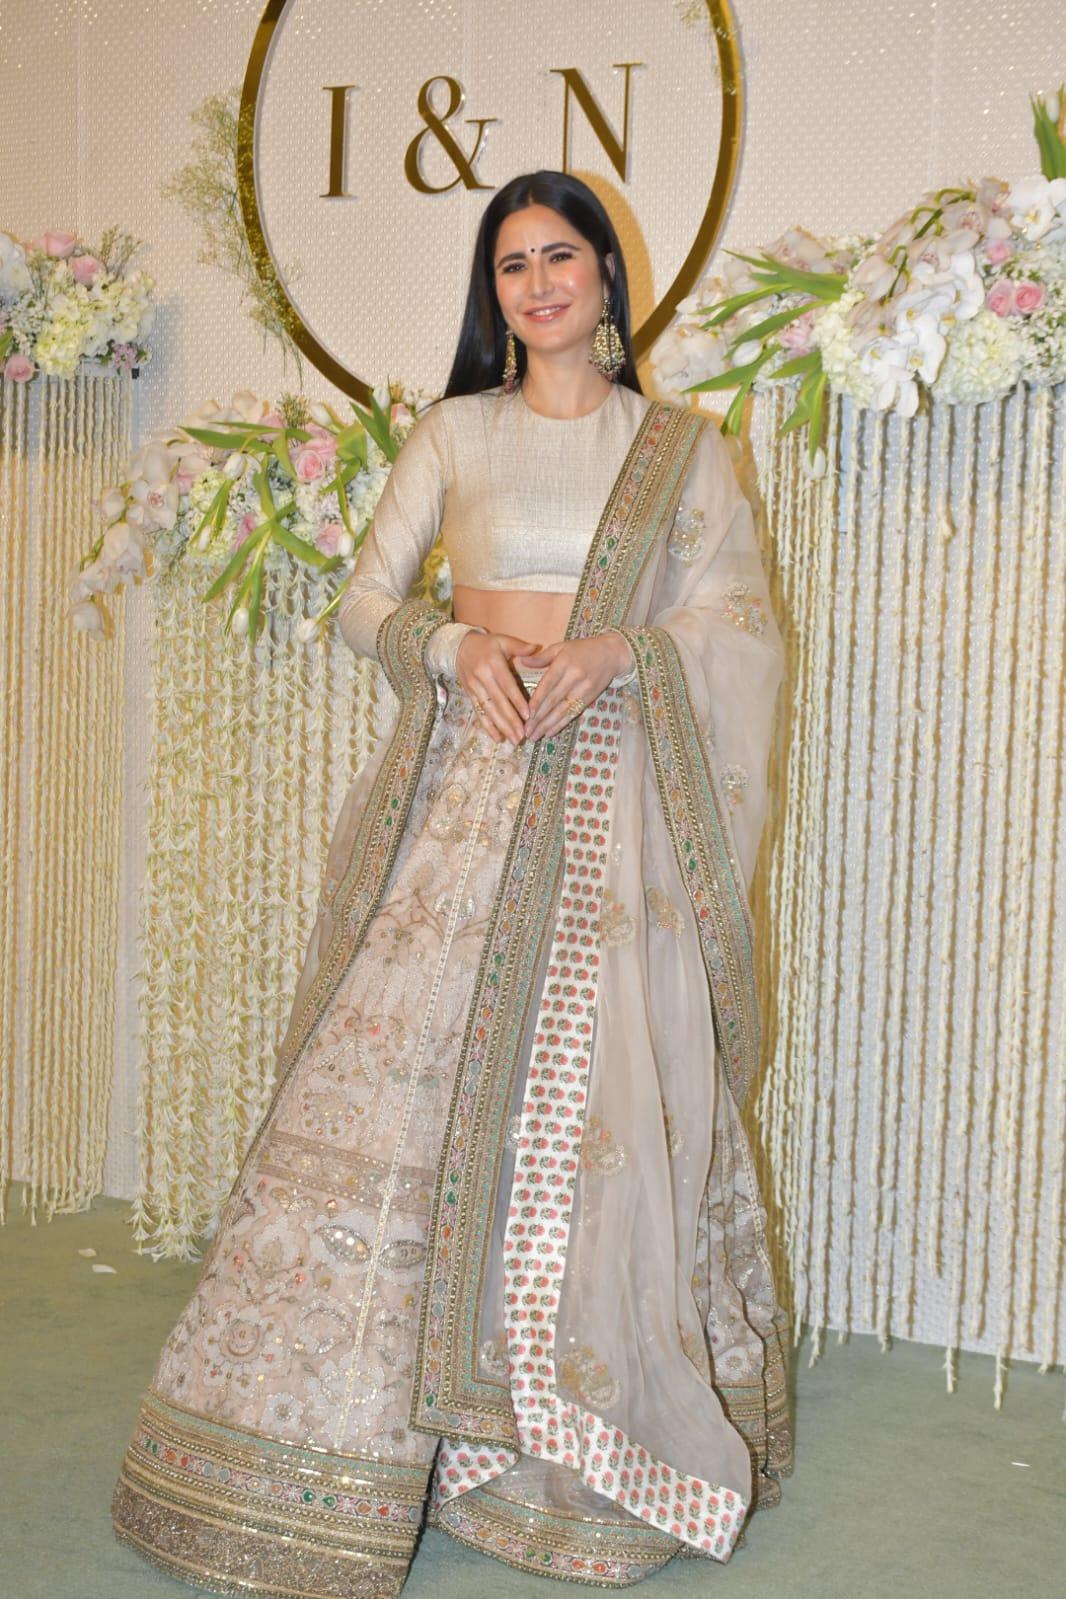 Katrina Kaif also attended the star-studded celebration. The diva took our breath away in a gorgeous lehenga set; Katrina's entry stole hearts